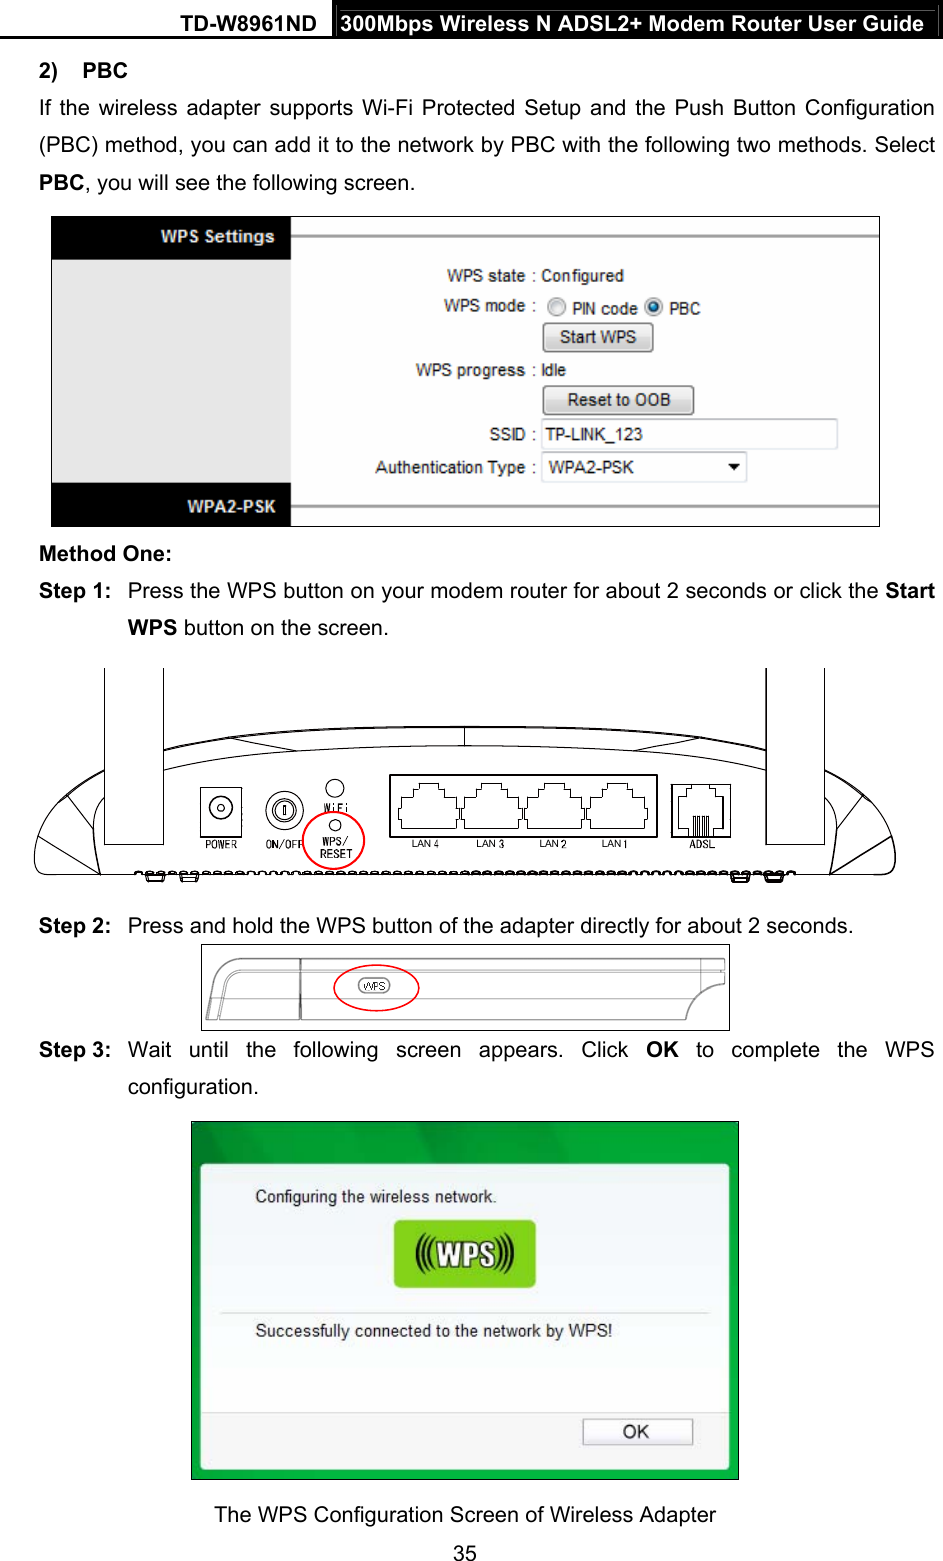 TD-W8961ND  300Mbps Wireless N ADSL2+ Modem Router User Guide  352) PBC If the wireless adapter supports Wi-Fi Protected Setup and the Push Button Configuration (PBC) method, you can add it to the network by PBC with the following two methods. Select PBC, you will see the following screen.  Method One: Step 1:  Press the WPS button on your modem router for about 2 seconds or click the Start WPS button on the screen. LAN LAN LAN LAN Step 2:  Press and hold the WPS button of the adapter directly for about 2 seconds.  Step 3:  Wait until the following screen appears. Click OK to complete the WPS configuration.  The WPS Configuration Screen of Wireless Adapter   